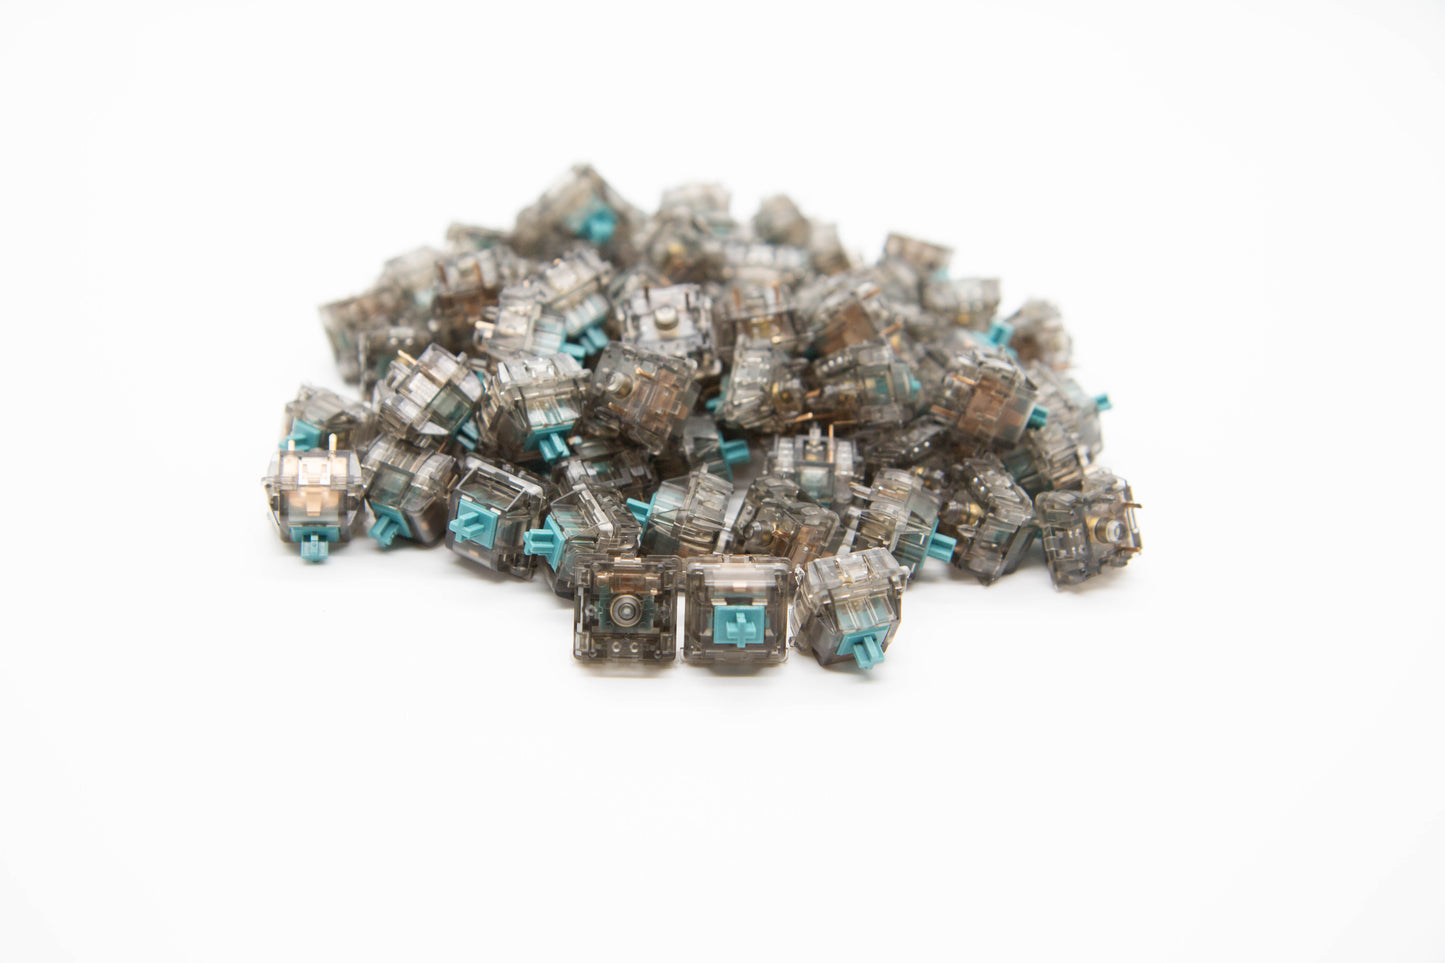 Close-up shot of a pile of Durock T1 mechanical keyboard switches featuring gray transparent housing and dark teal stems